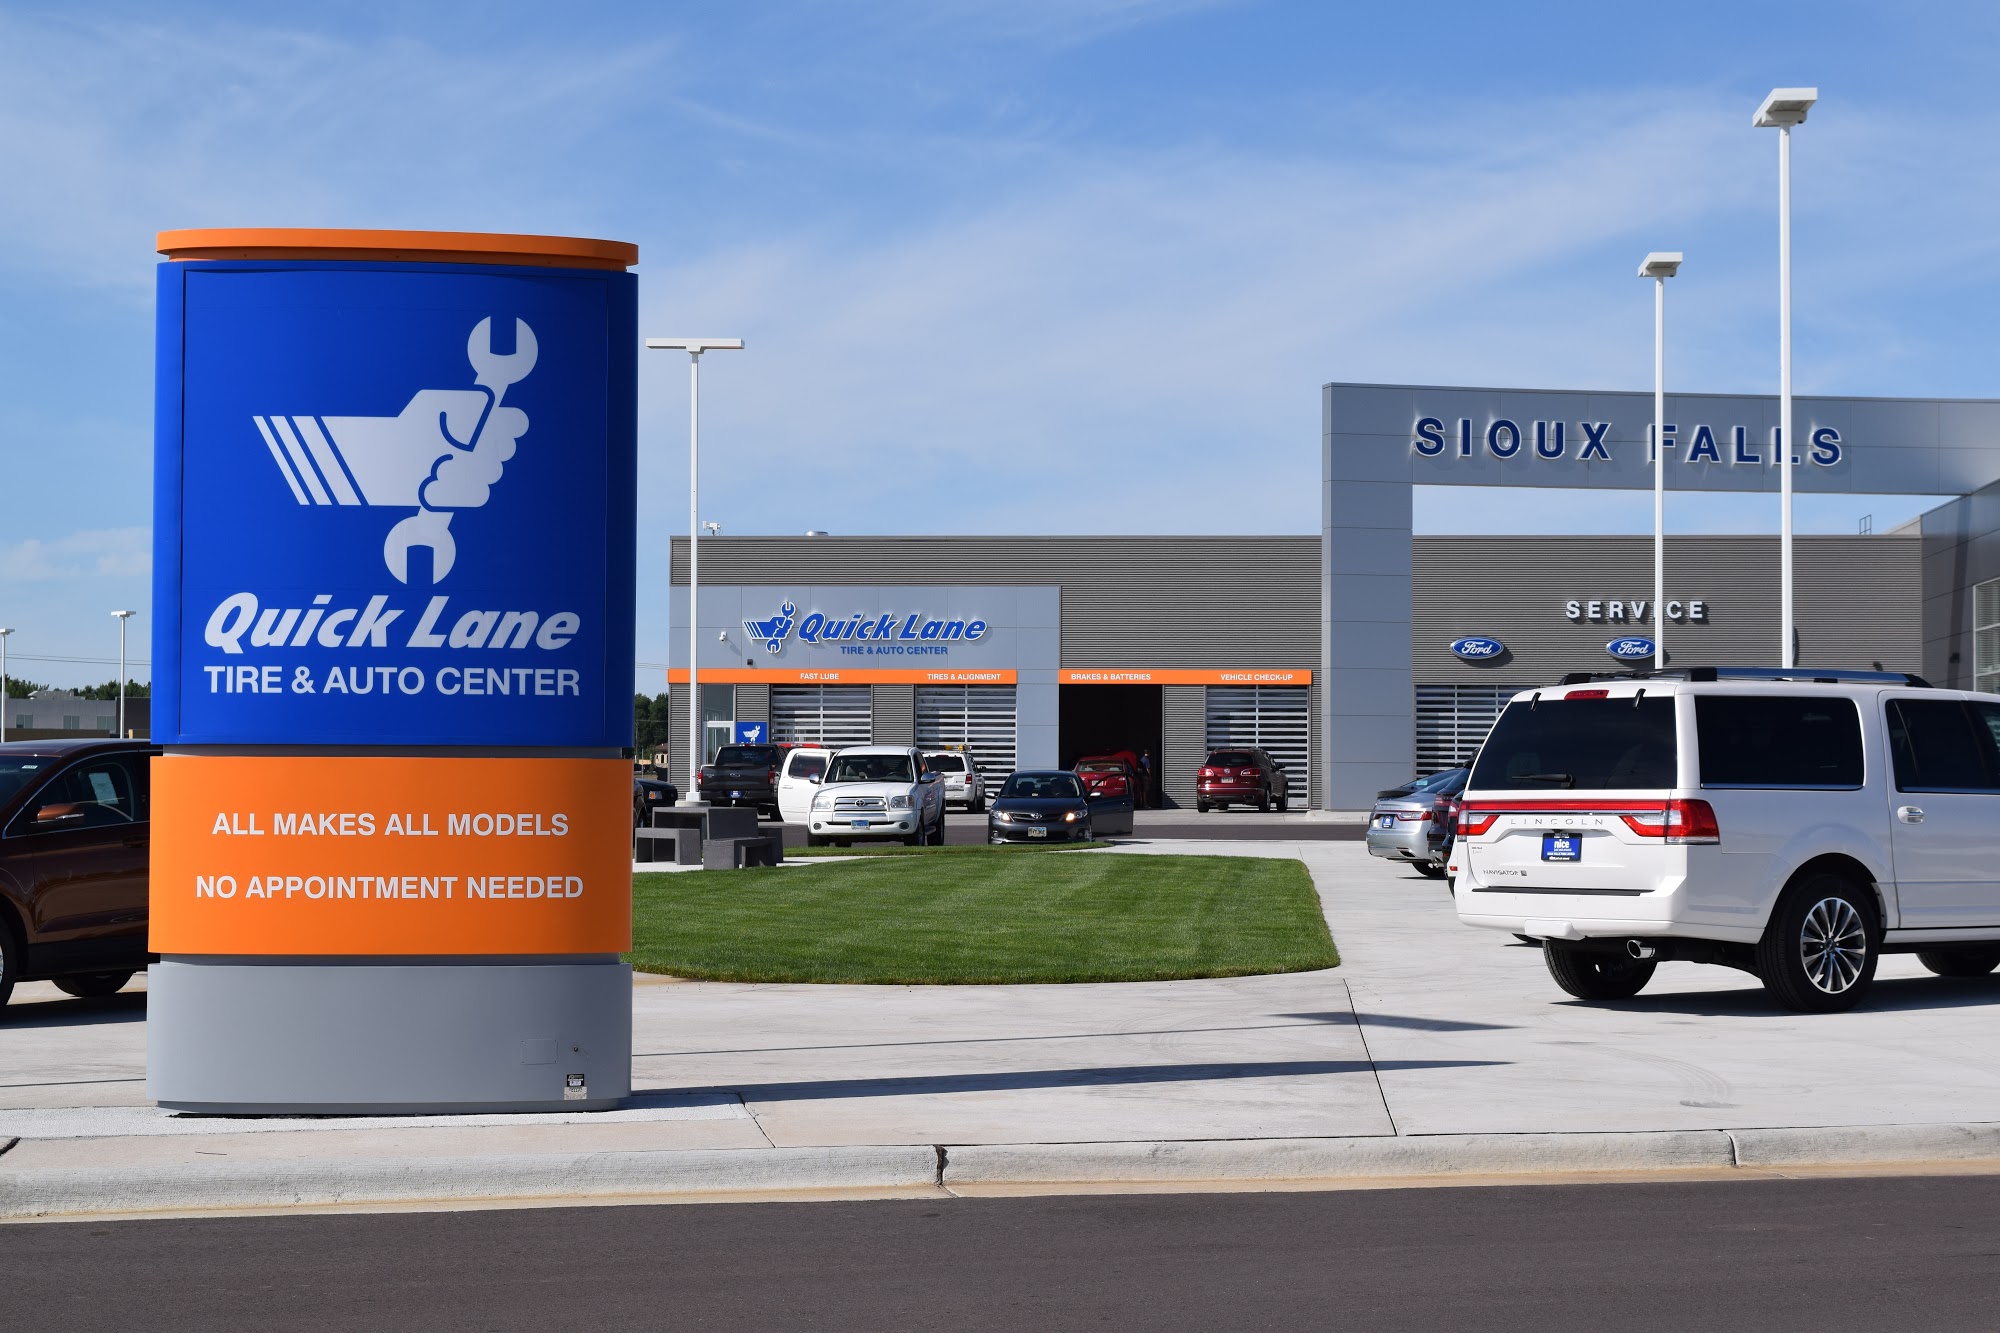 Quick Lane at Sioux Falls Ford Lincoln